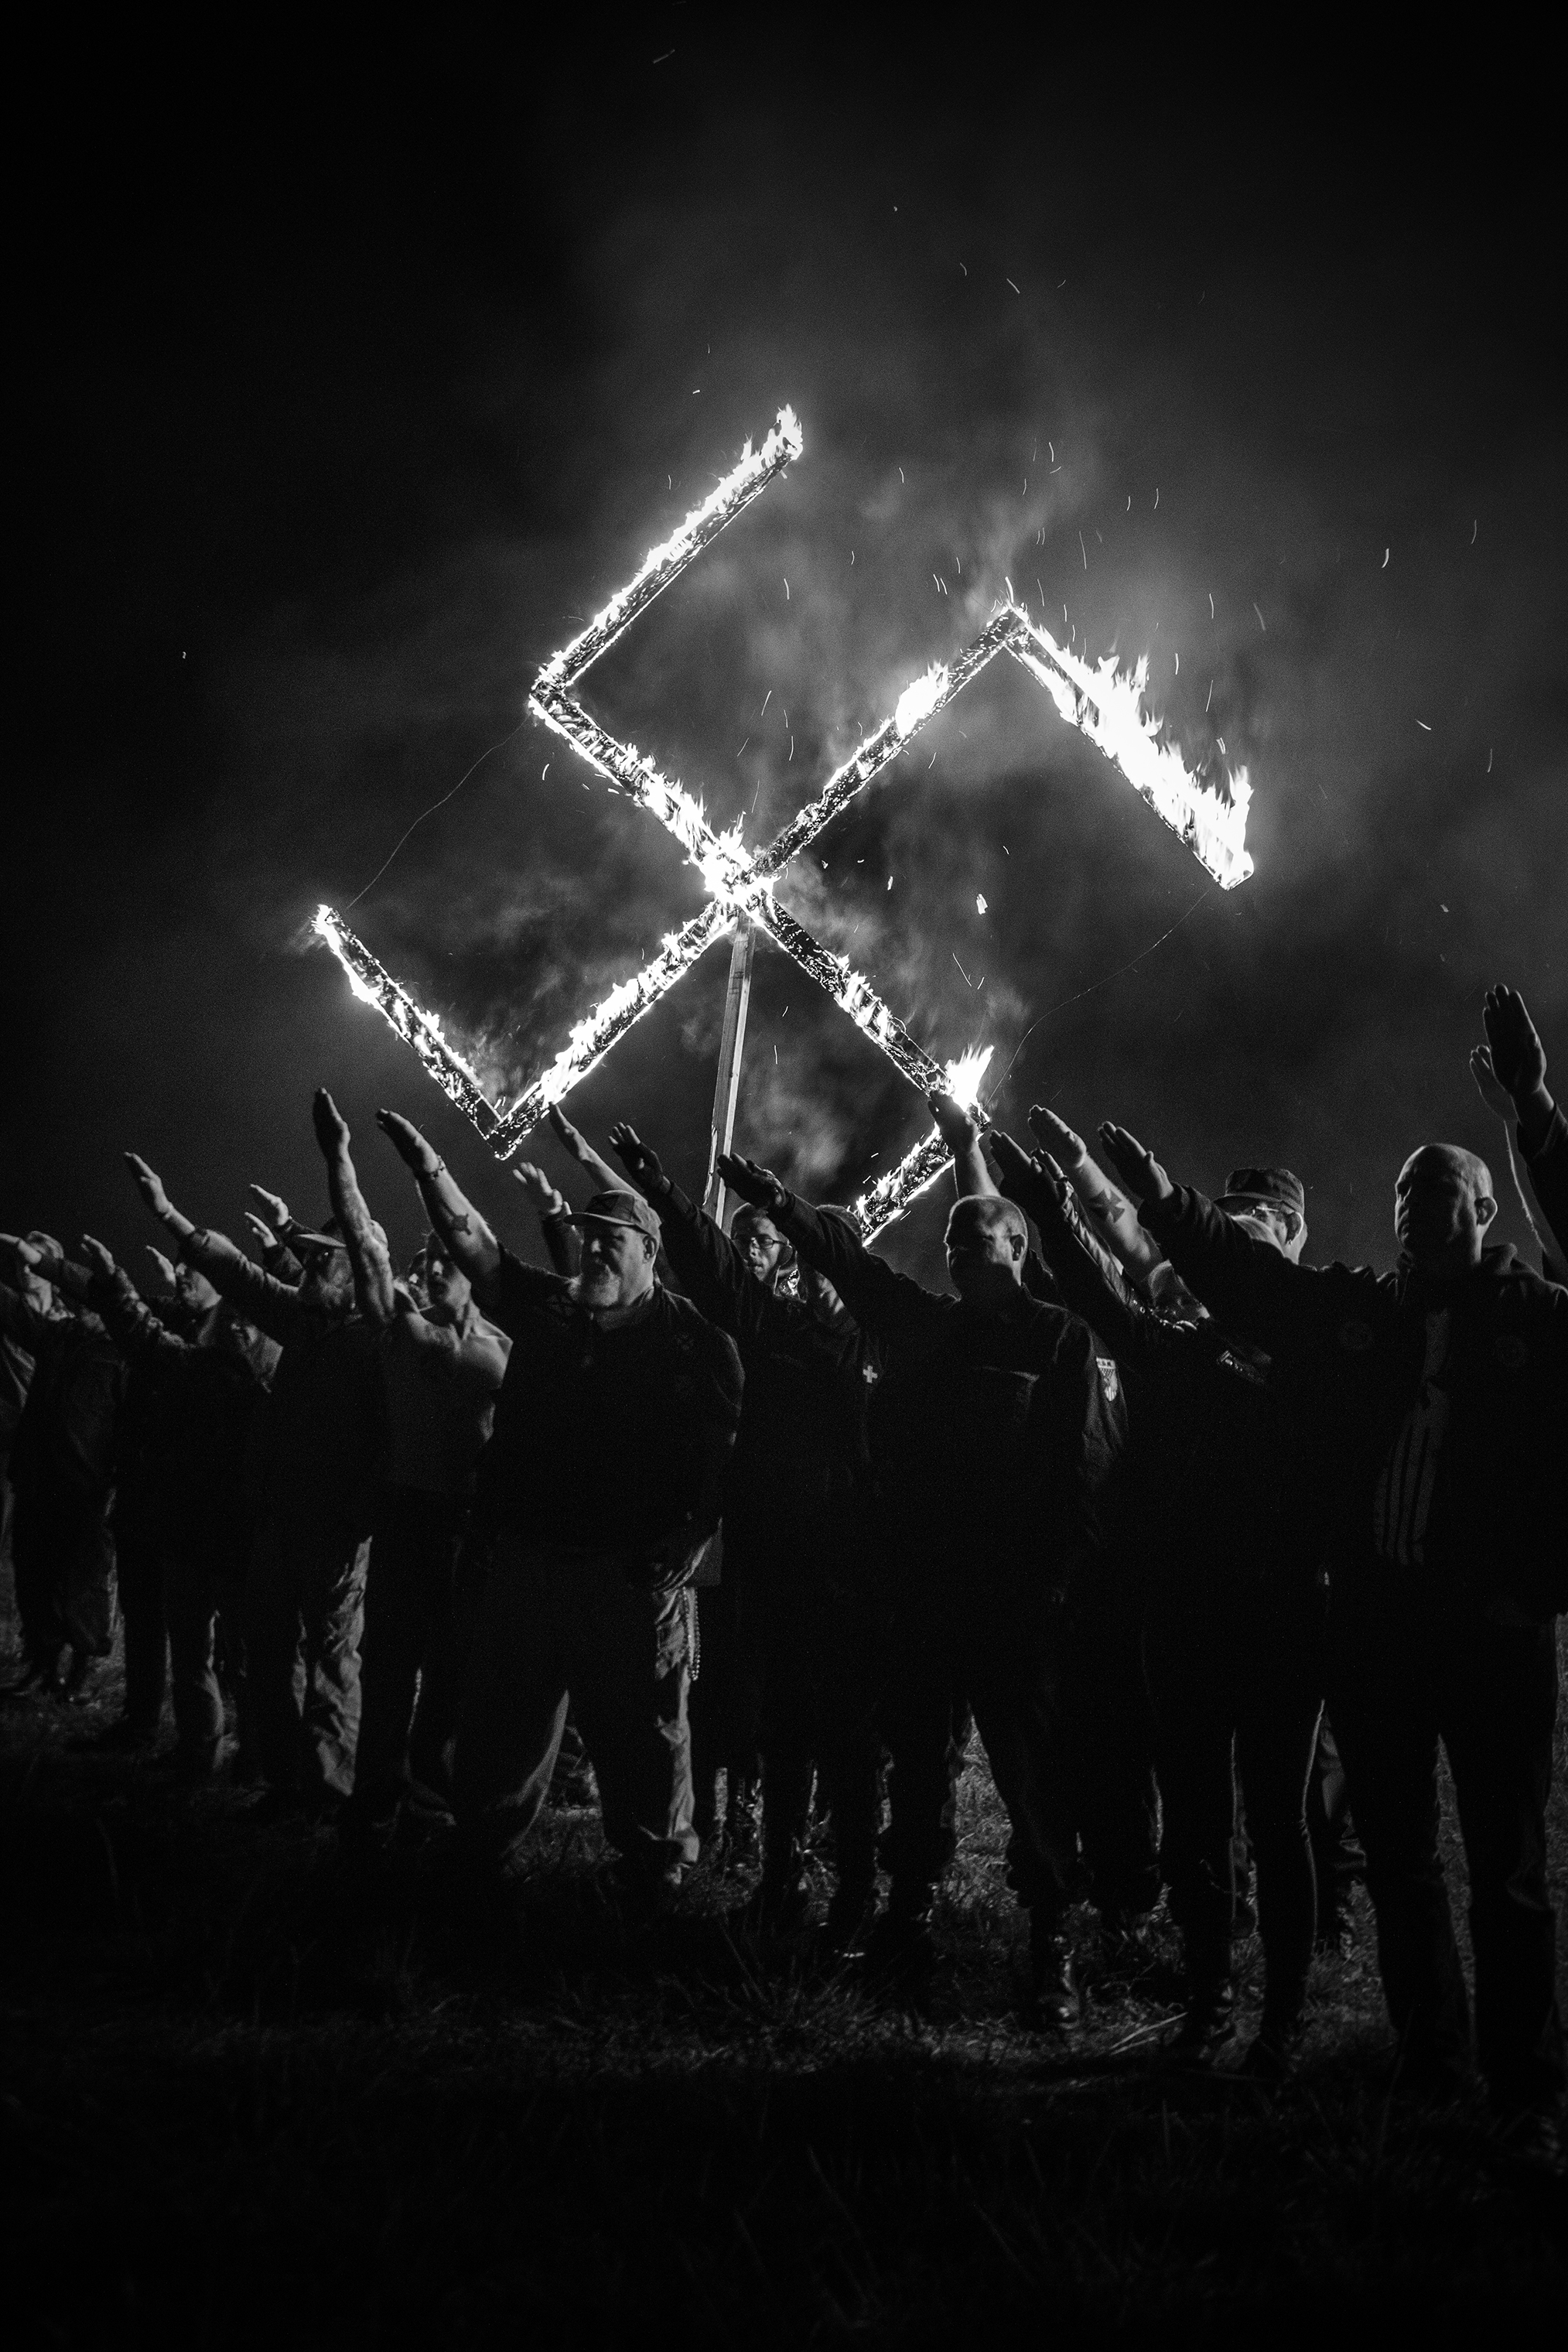 The National Socialist Movement holds a lighting ceremony following a rally that was held in Newnan, Ga., on April 21, 2018. (Mark Peterson—Redux)